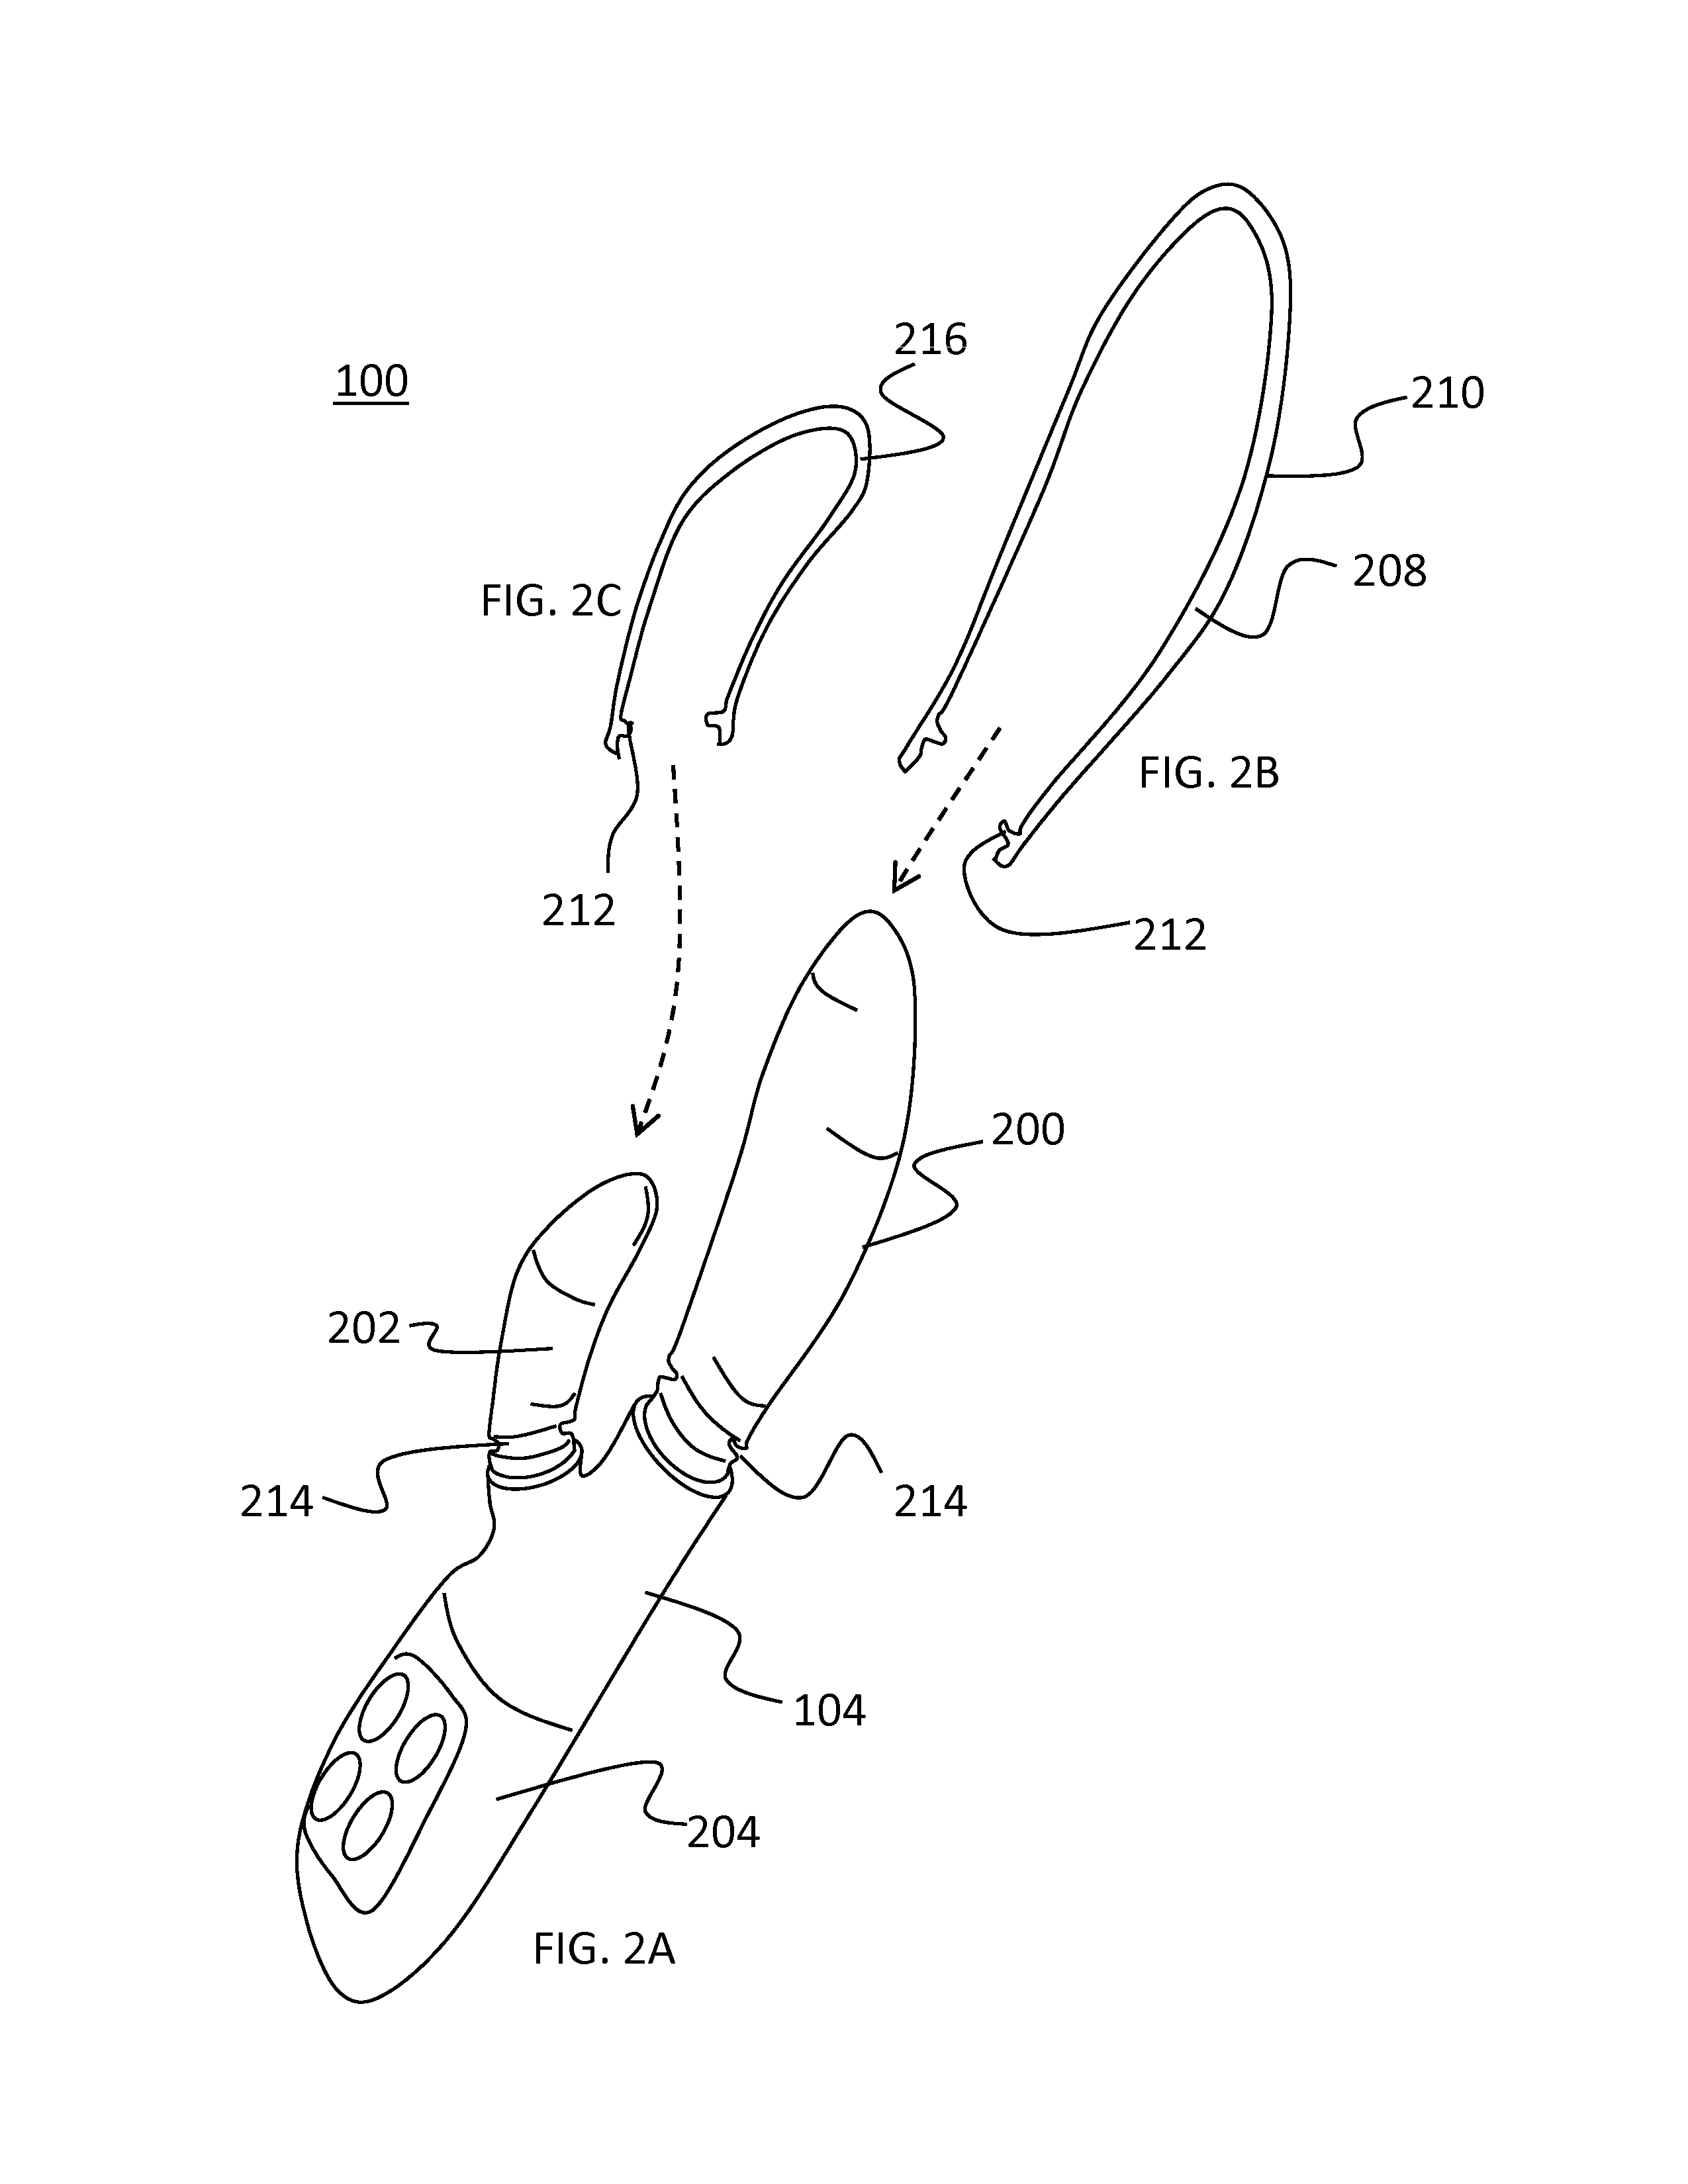 Sexual stimulation device with interchangeable sheaths